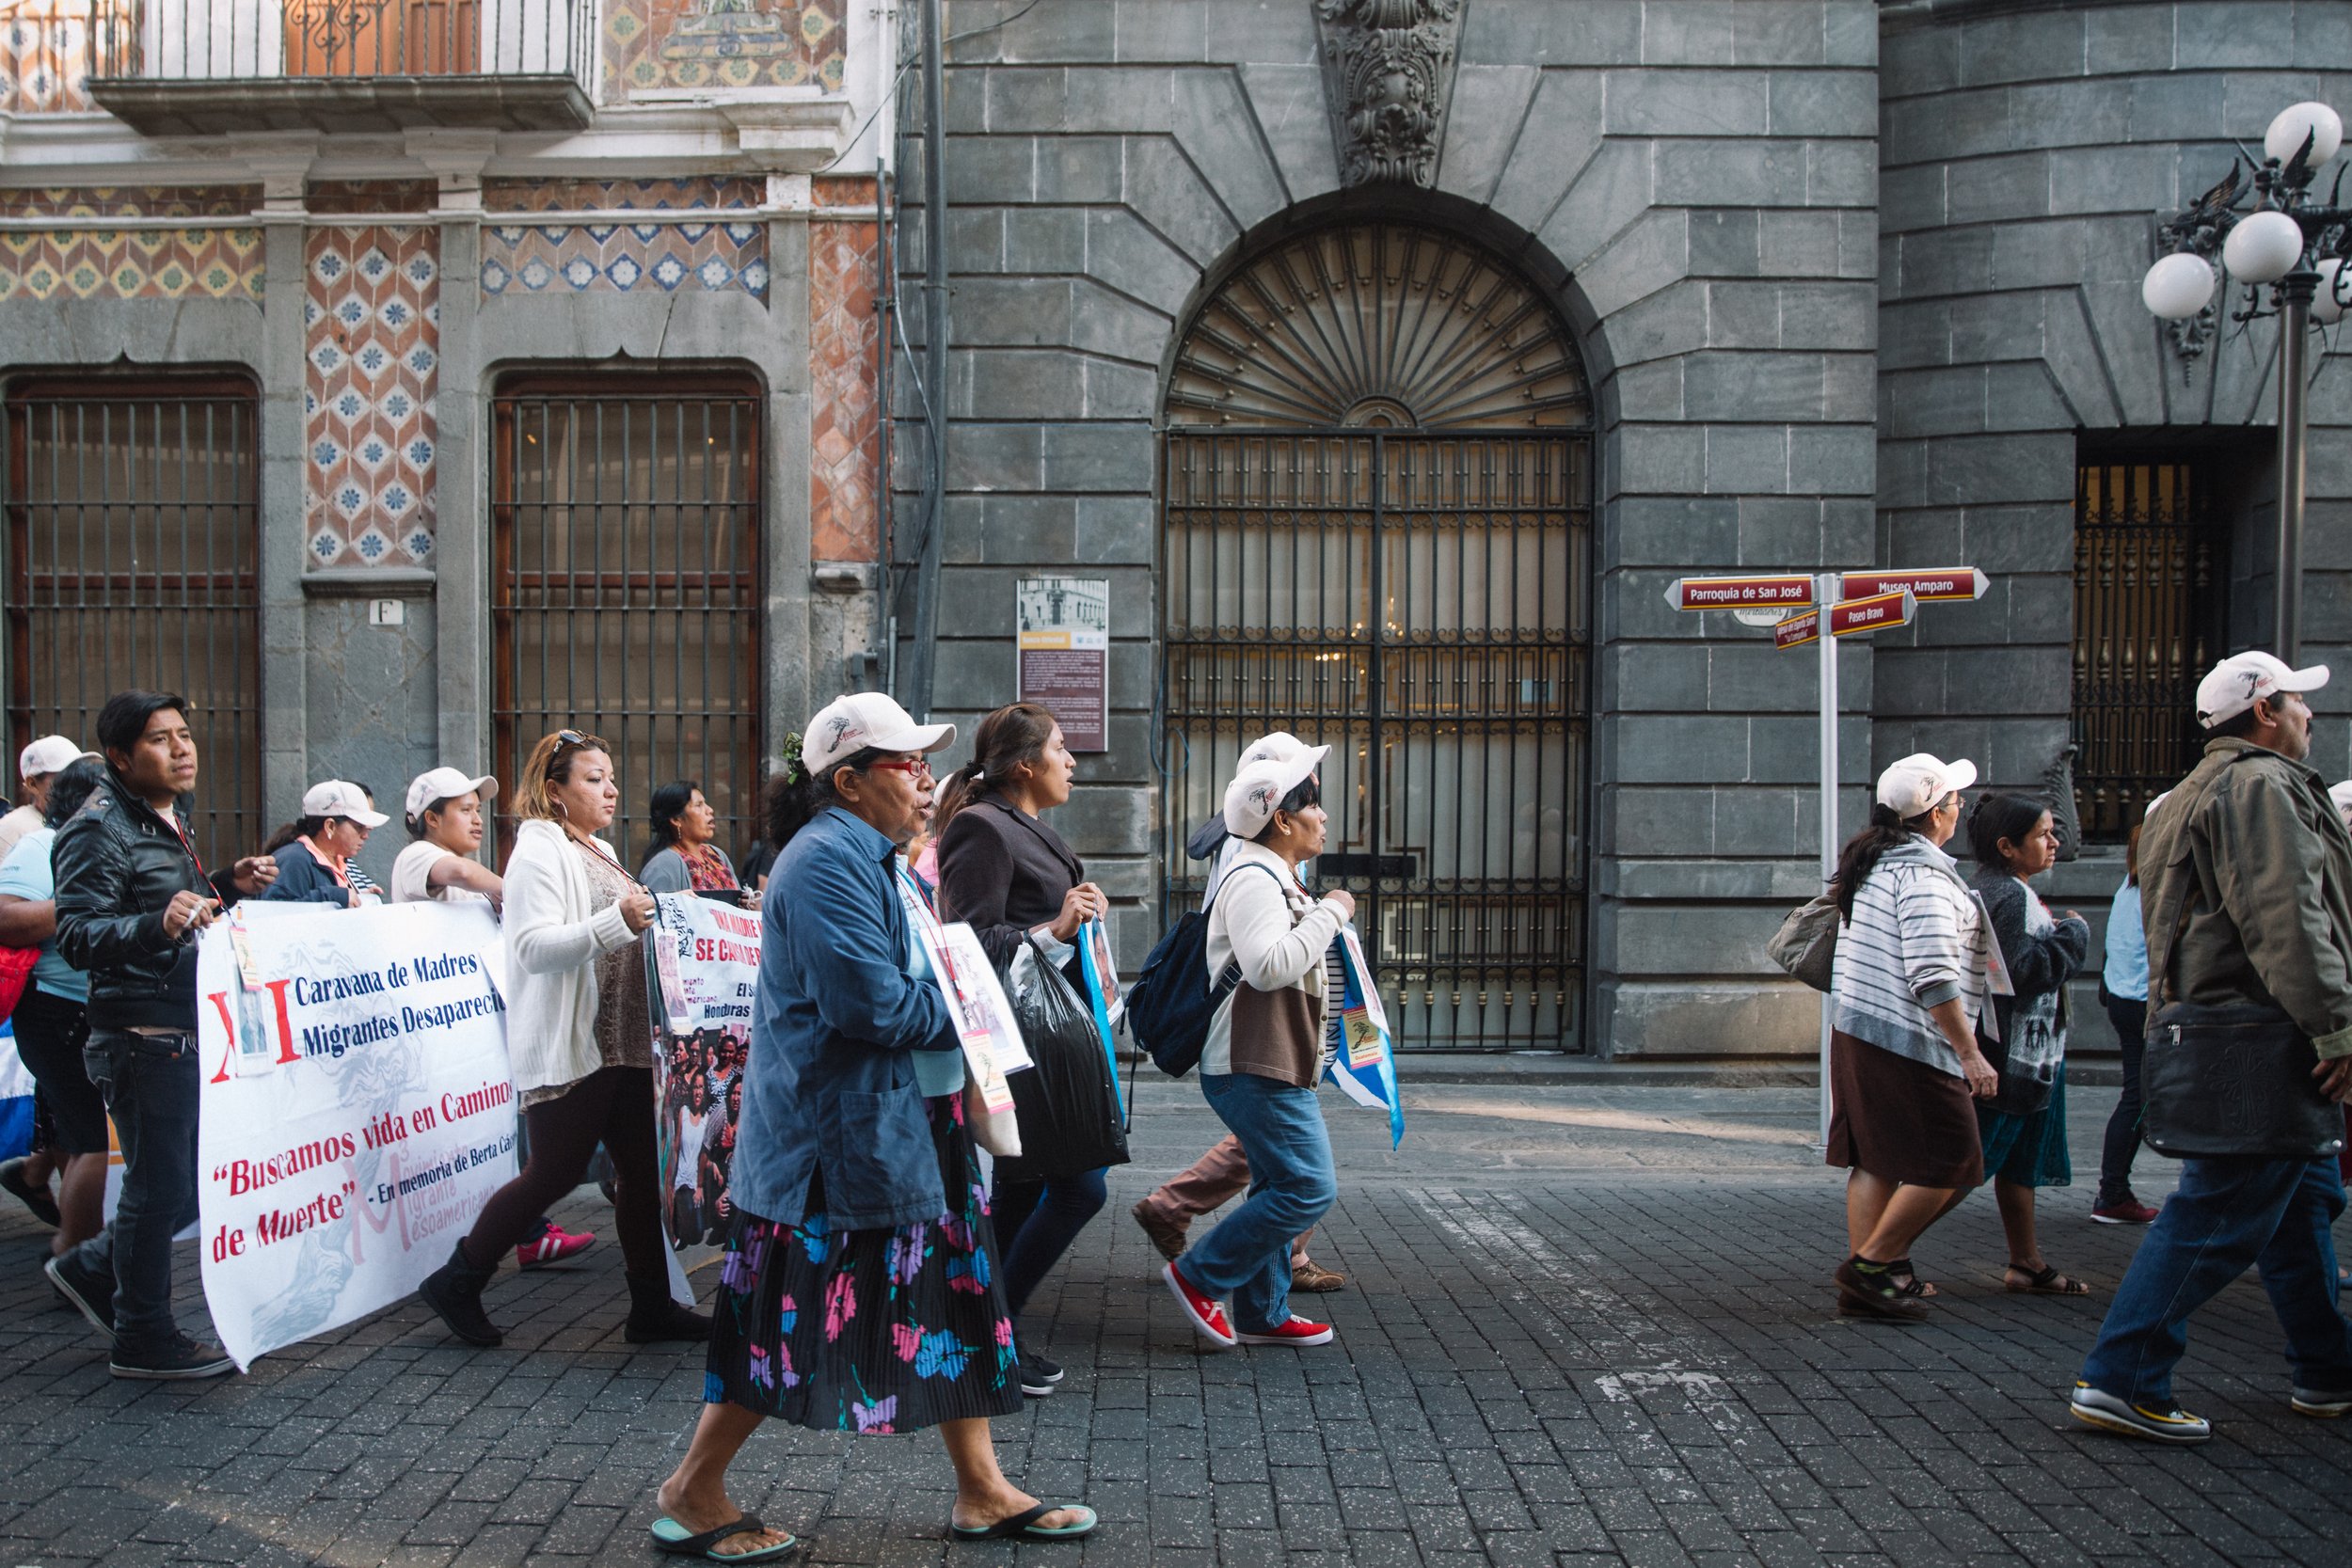  At every stop along their journey, the caravan of mothers holds a public protest, using their collective voices to bring awareness to the issue of missing migrants and demanding justice from the Mexican government. 